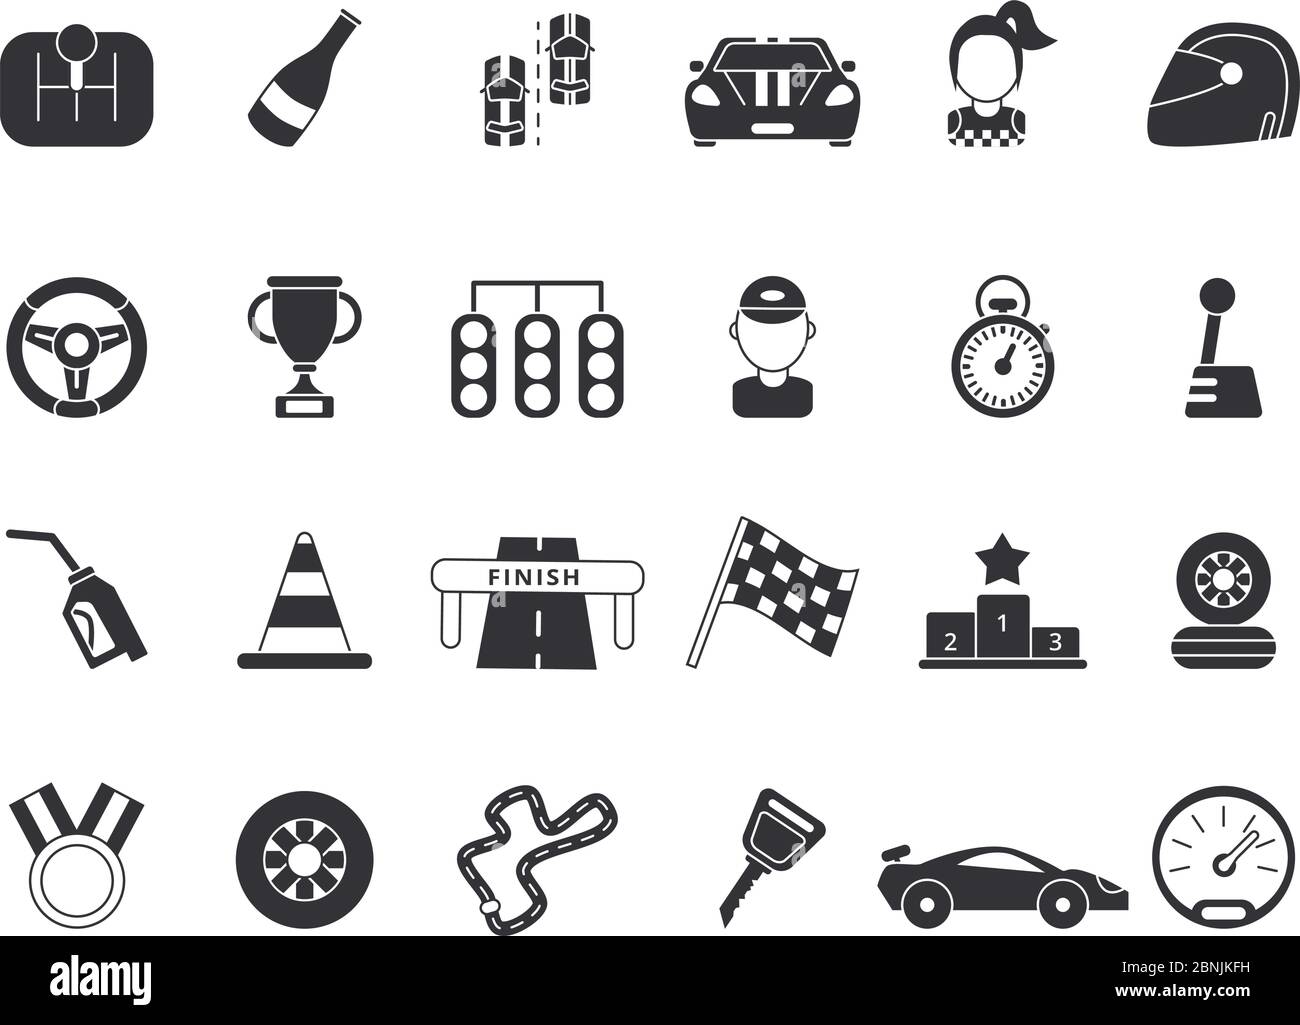 Monochrome pictures set of sport symbols for formula 1 and racing cars Stock Vector